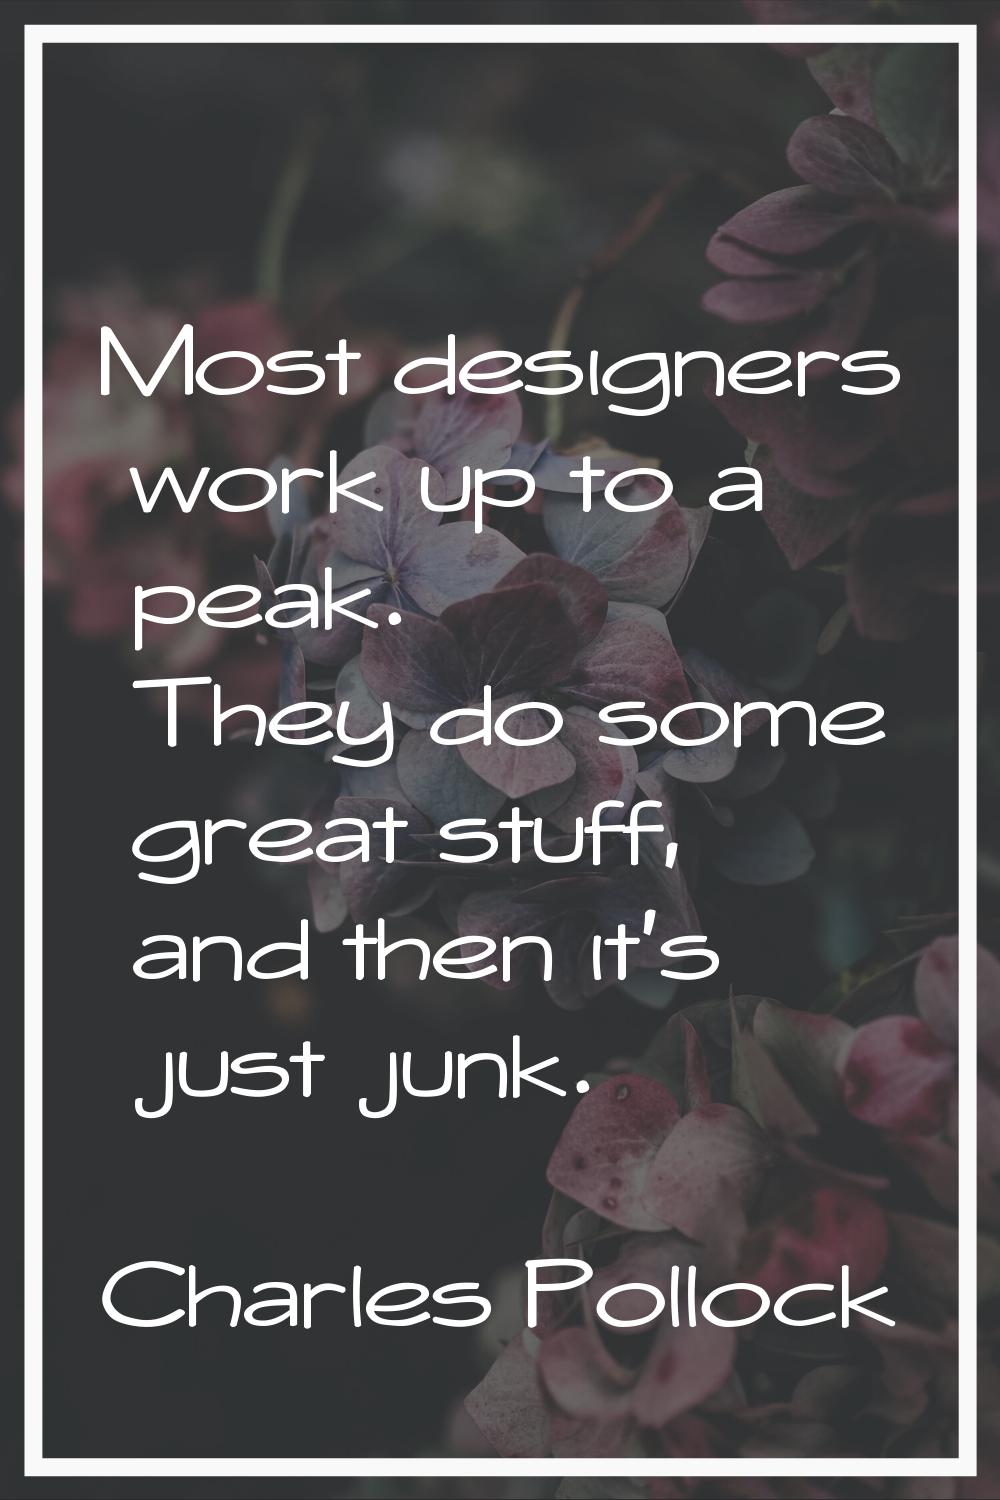 Most designers work up to a peak. They do some great stuff, and then it's just junk.